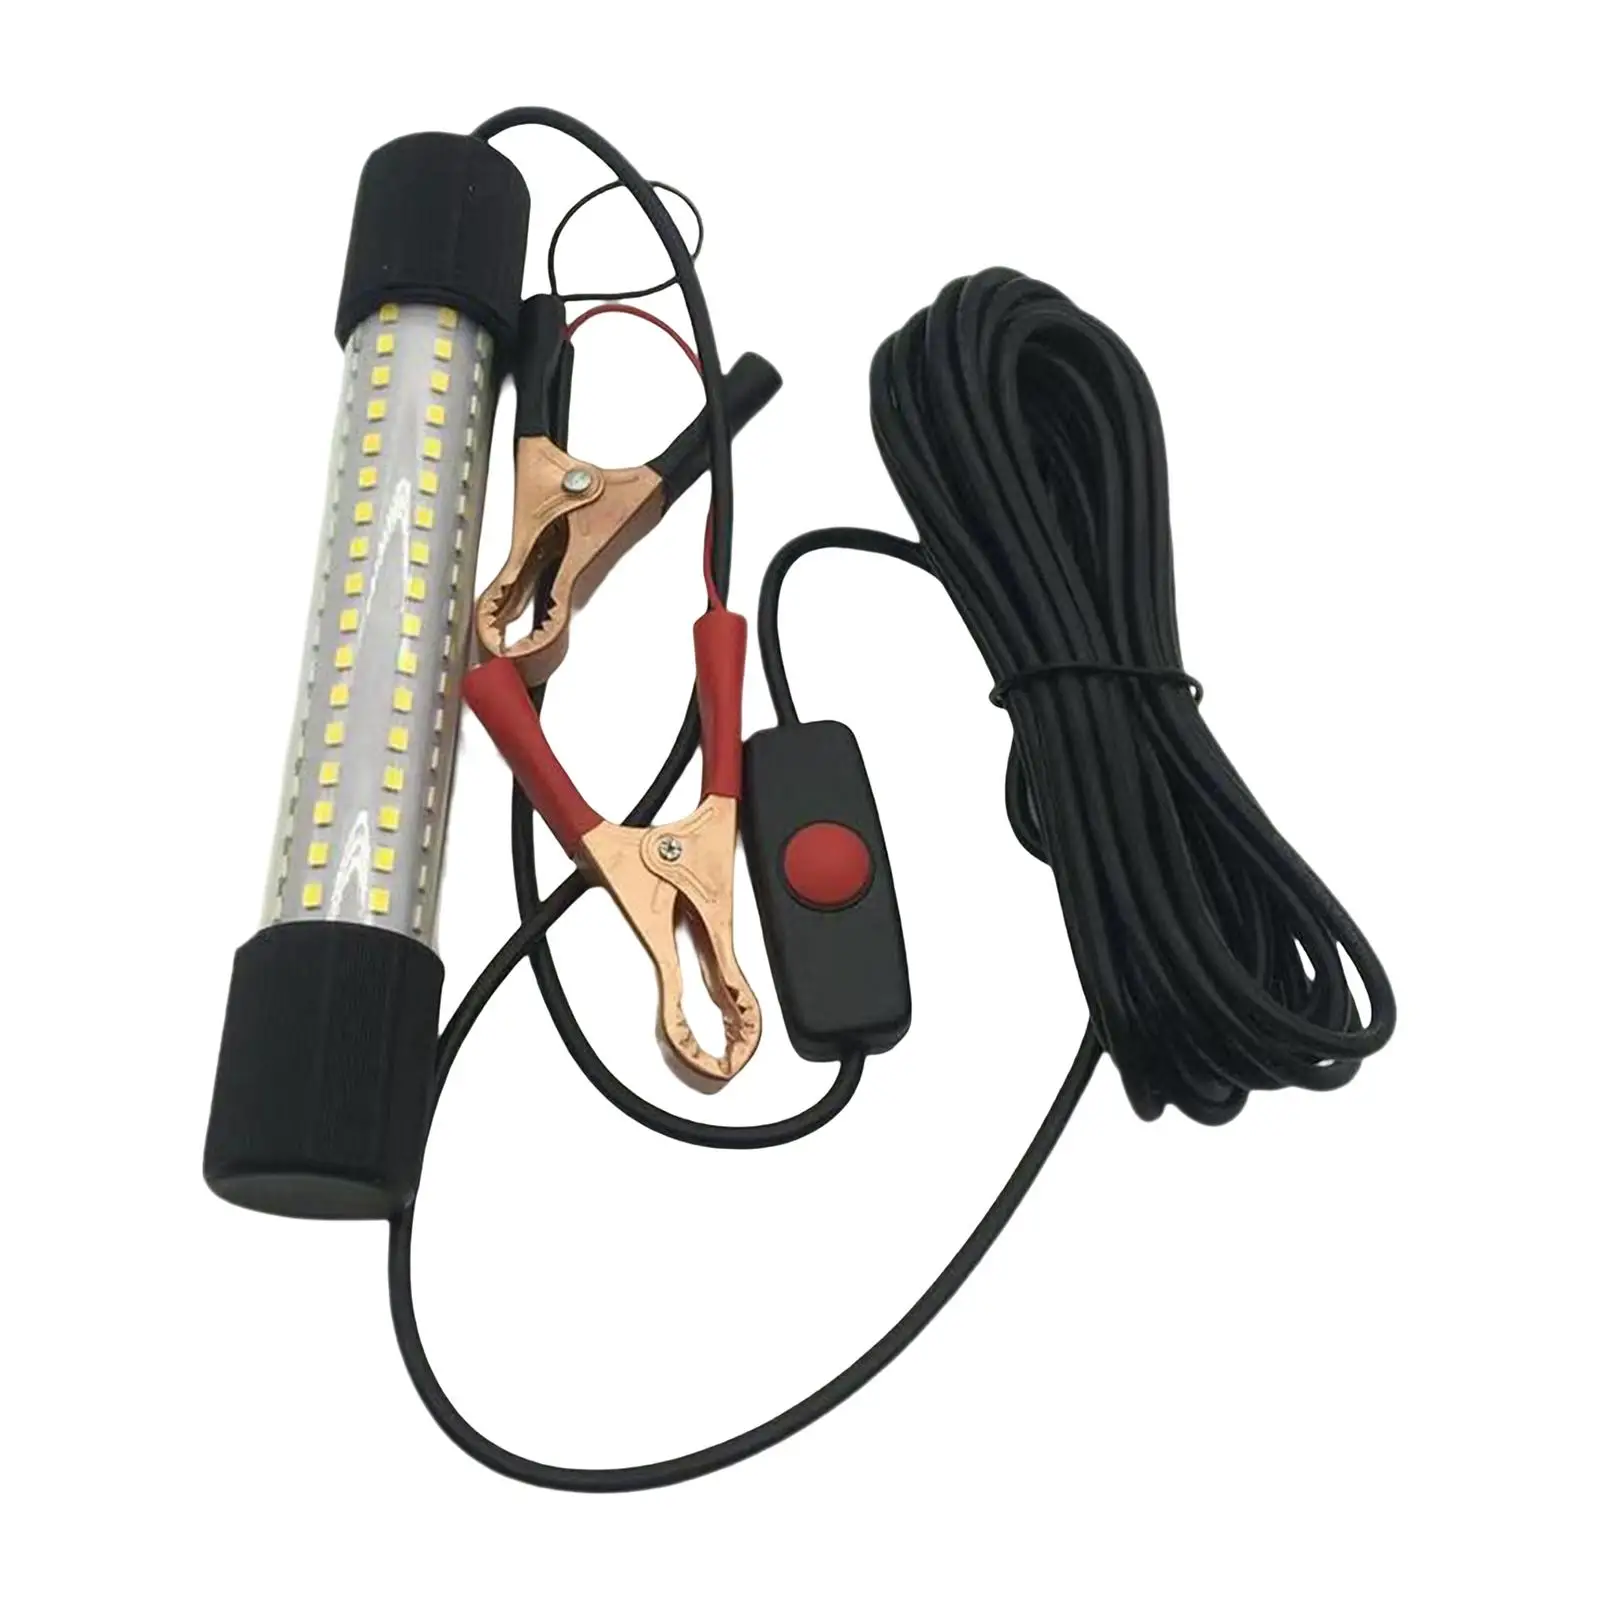 LED Submersible Fishing Light Underwater Fish Finder Lamp for Boat Dock Shrimp, Prawns, Squid and Fish